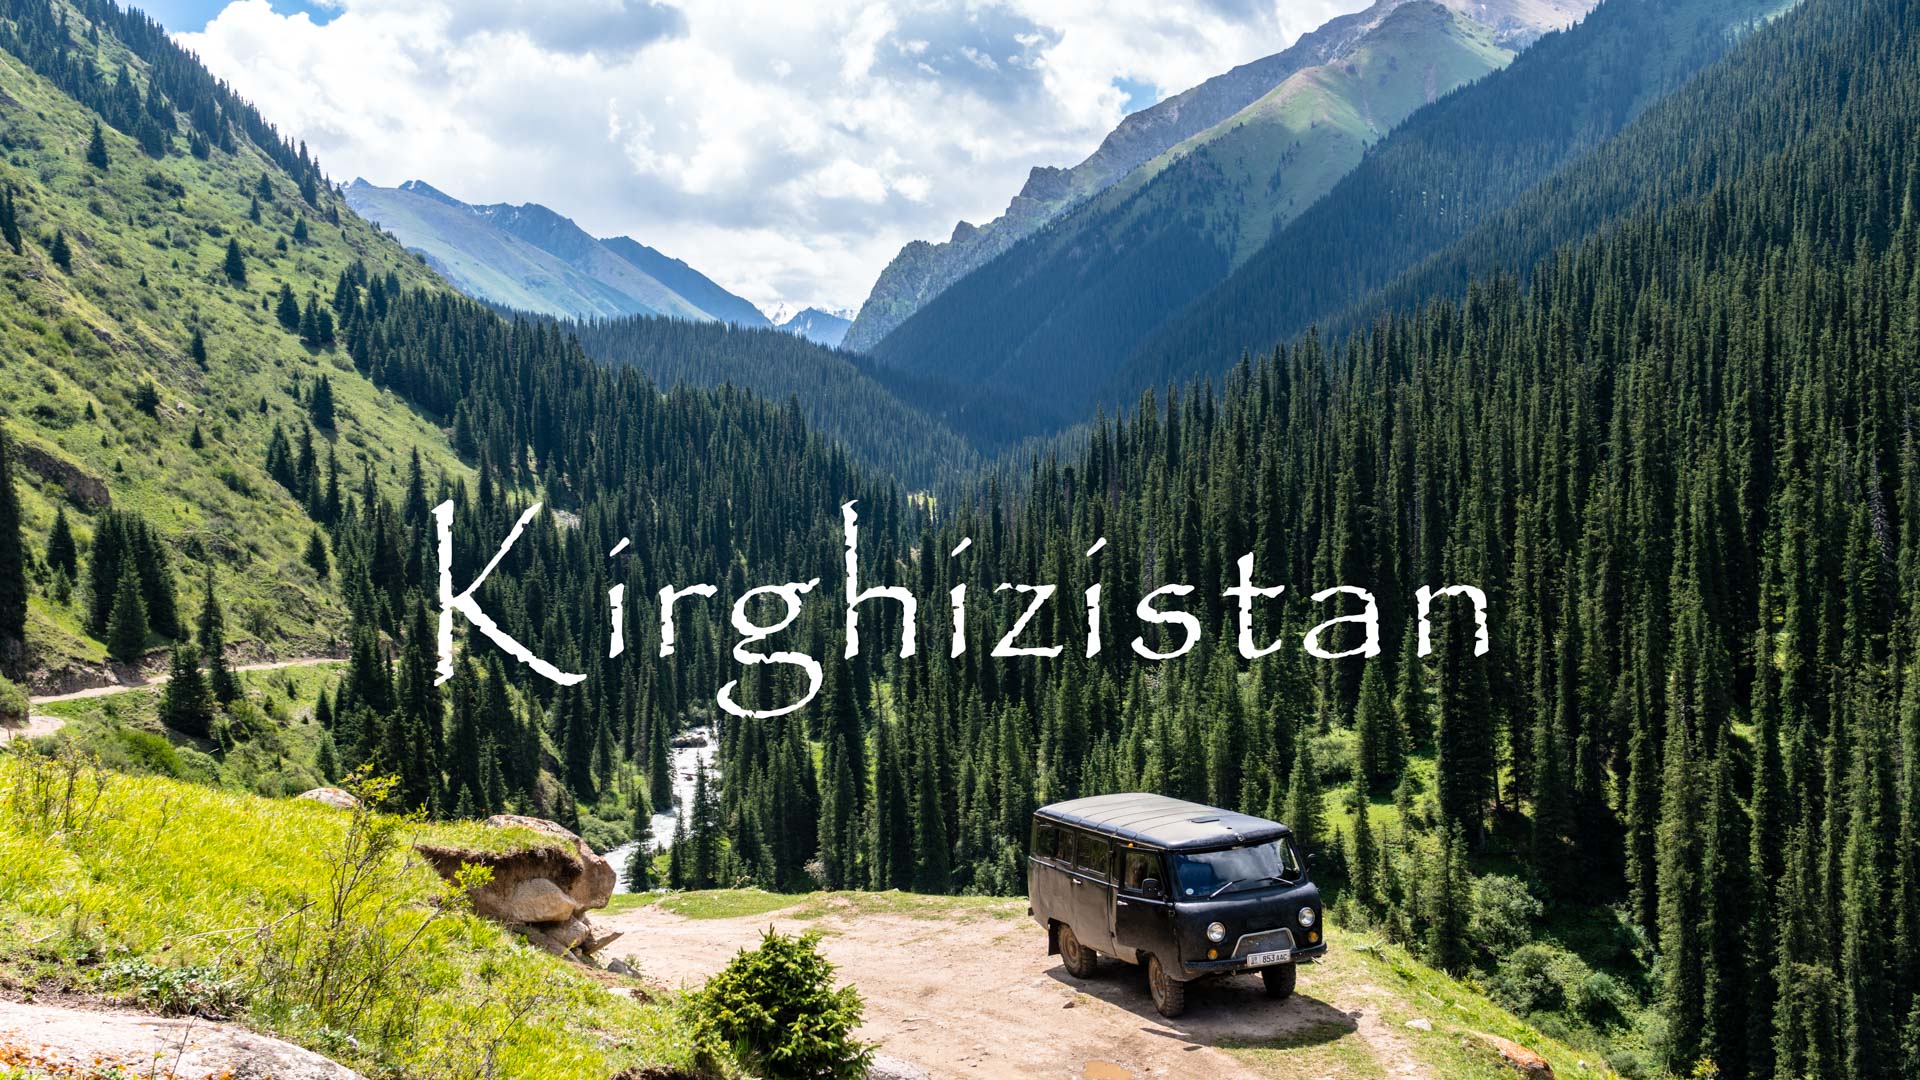 SerialHikers - Alternative Travel Blog SerialHikers - Engaged Travel & Without Flight Destination Kyrgyzstan: our travel guide Central Asia, Kyrgyzstan Destinations